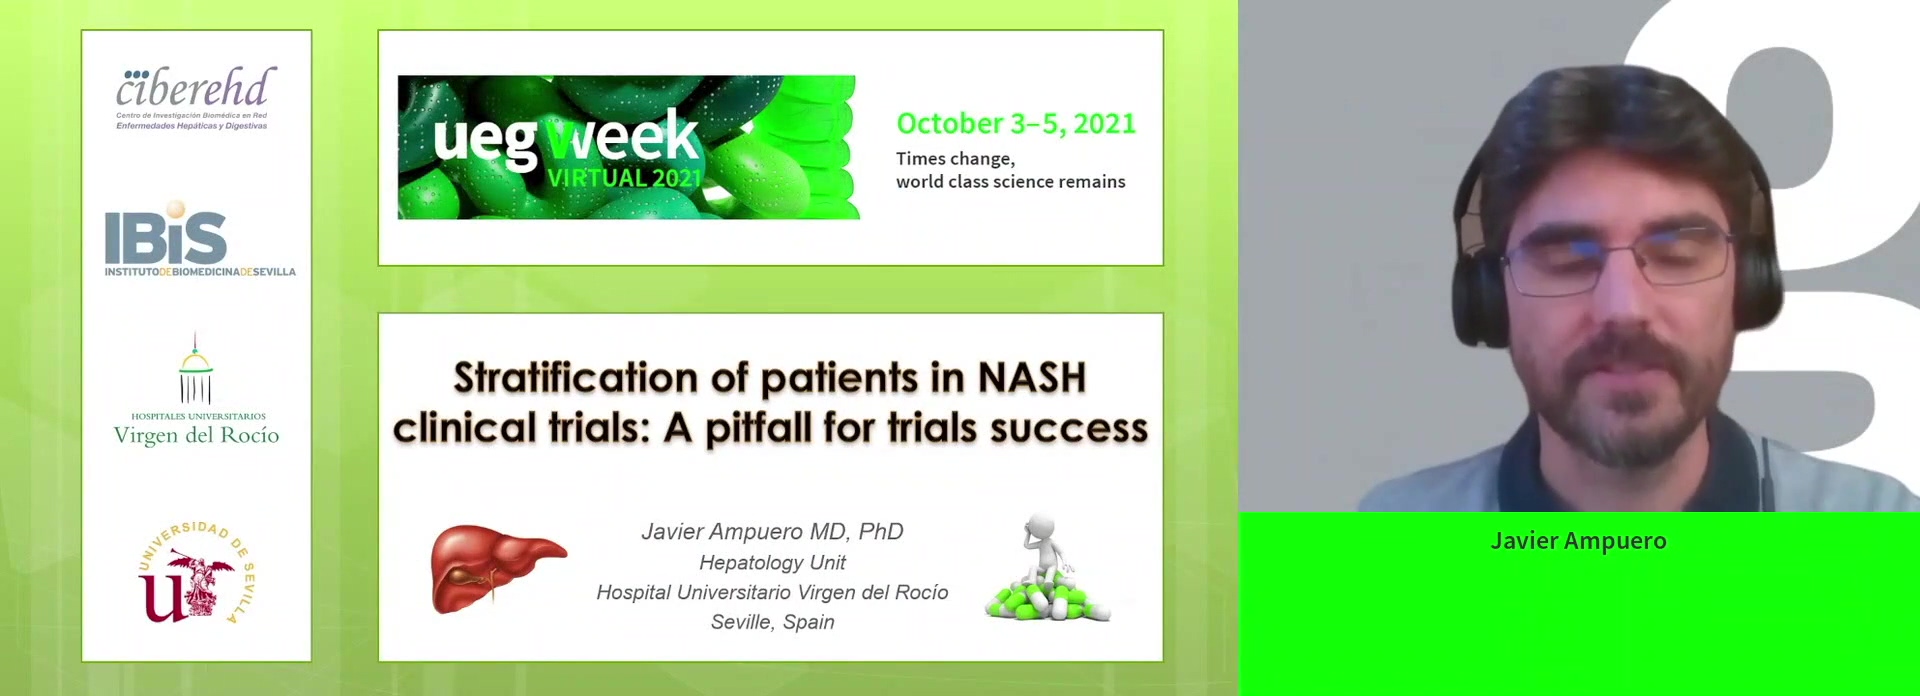 Stratification of patients in NASH clinical trials: A pitfall for trial success